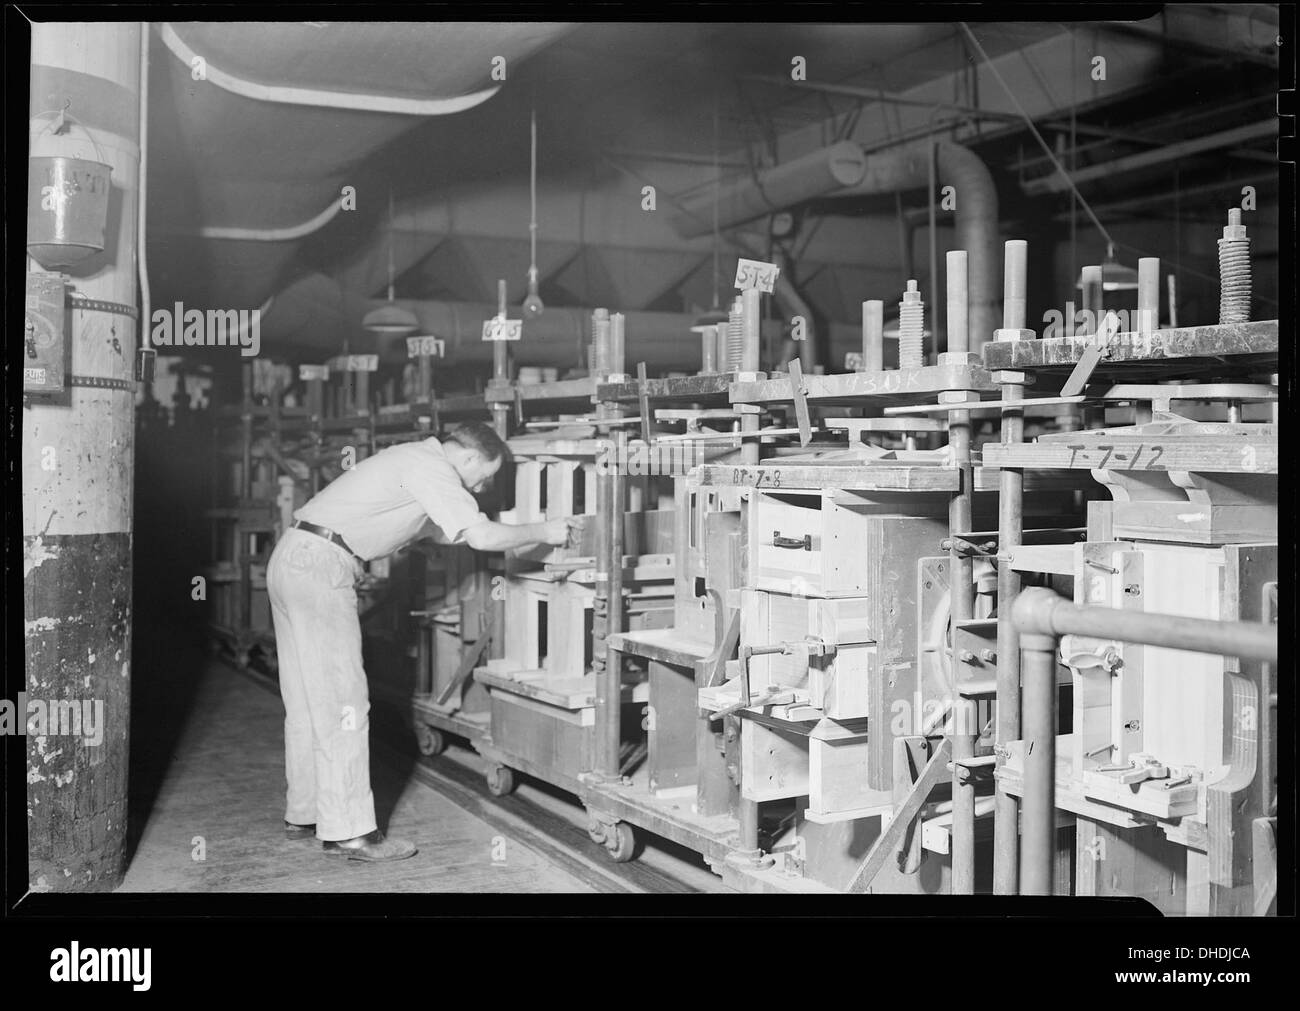 Camden, New Jersey - Cabinet making. RCA Victor. Cabinet assembler - assembling waist (front and ends of cabinet).... 518695 Stock Photo